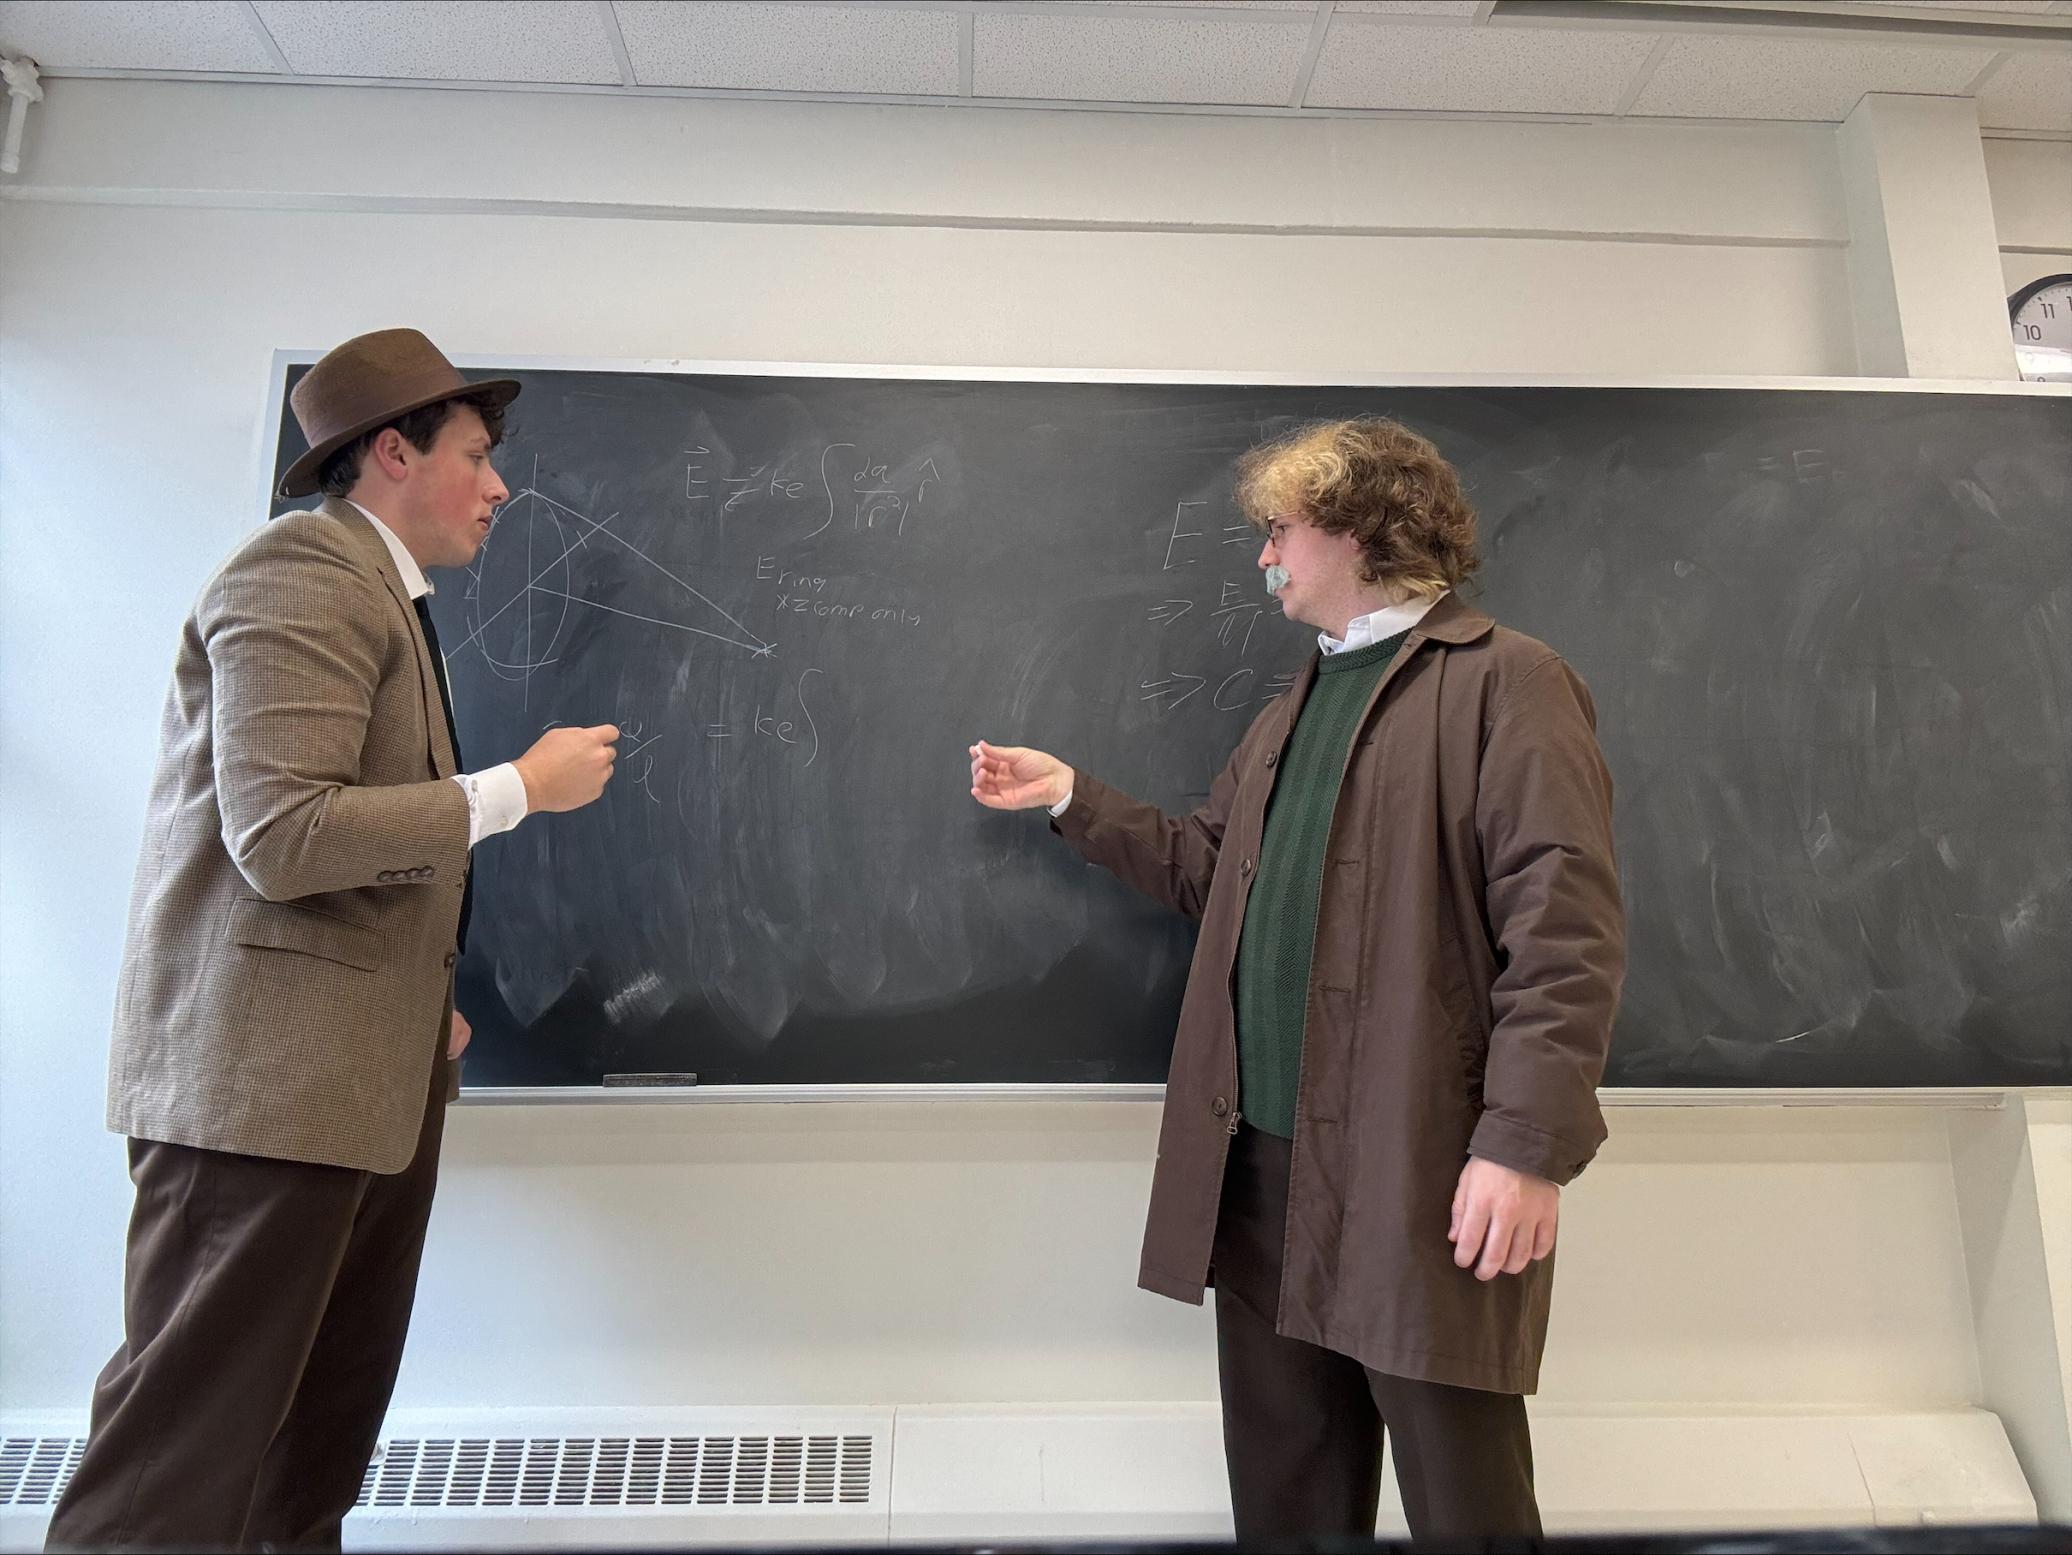 Sophomores Sam Penkava (left) and Clay Reece (right) as Oppenheimer and Einstein